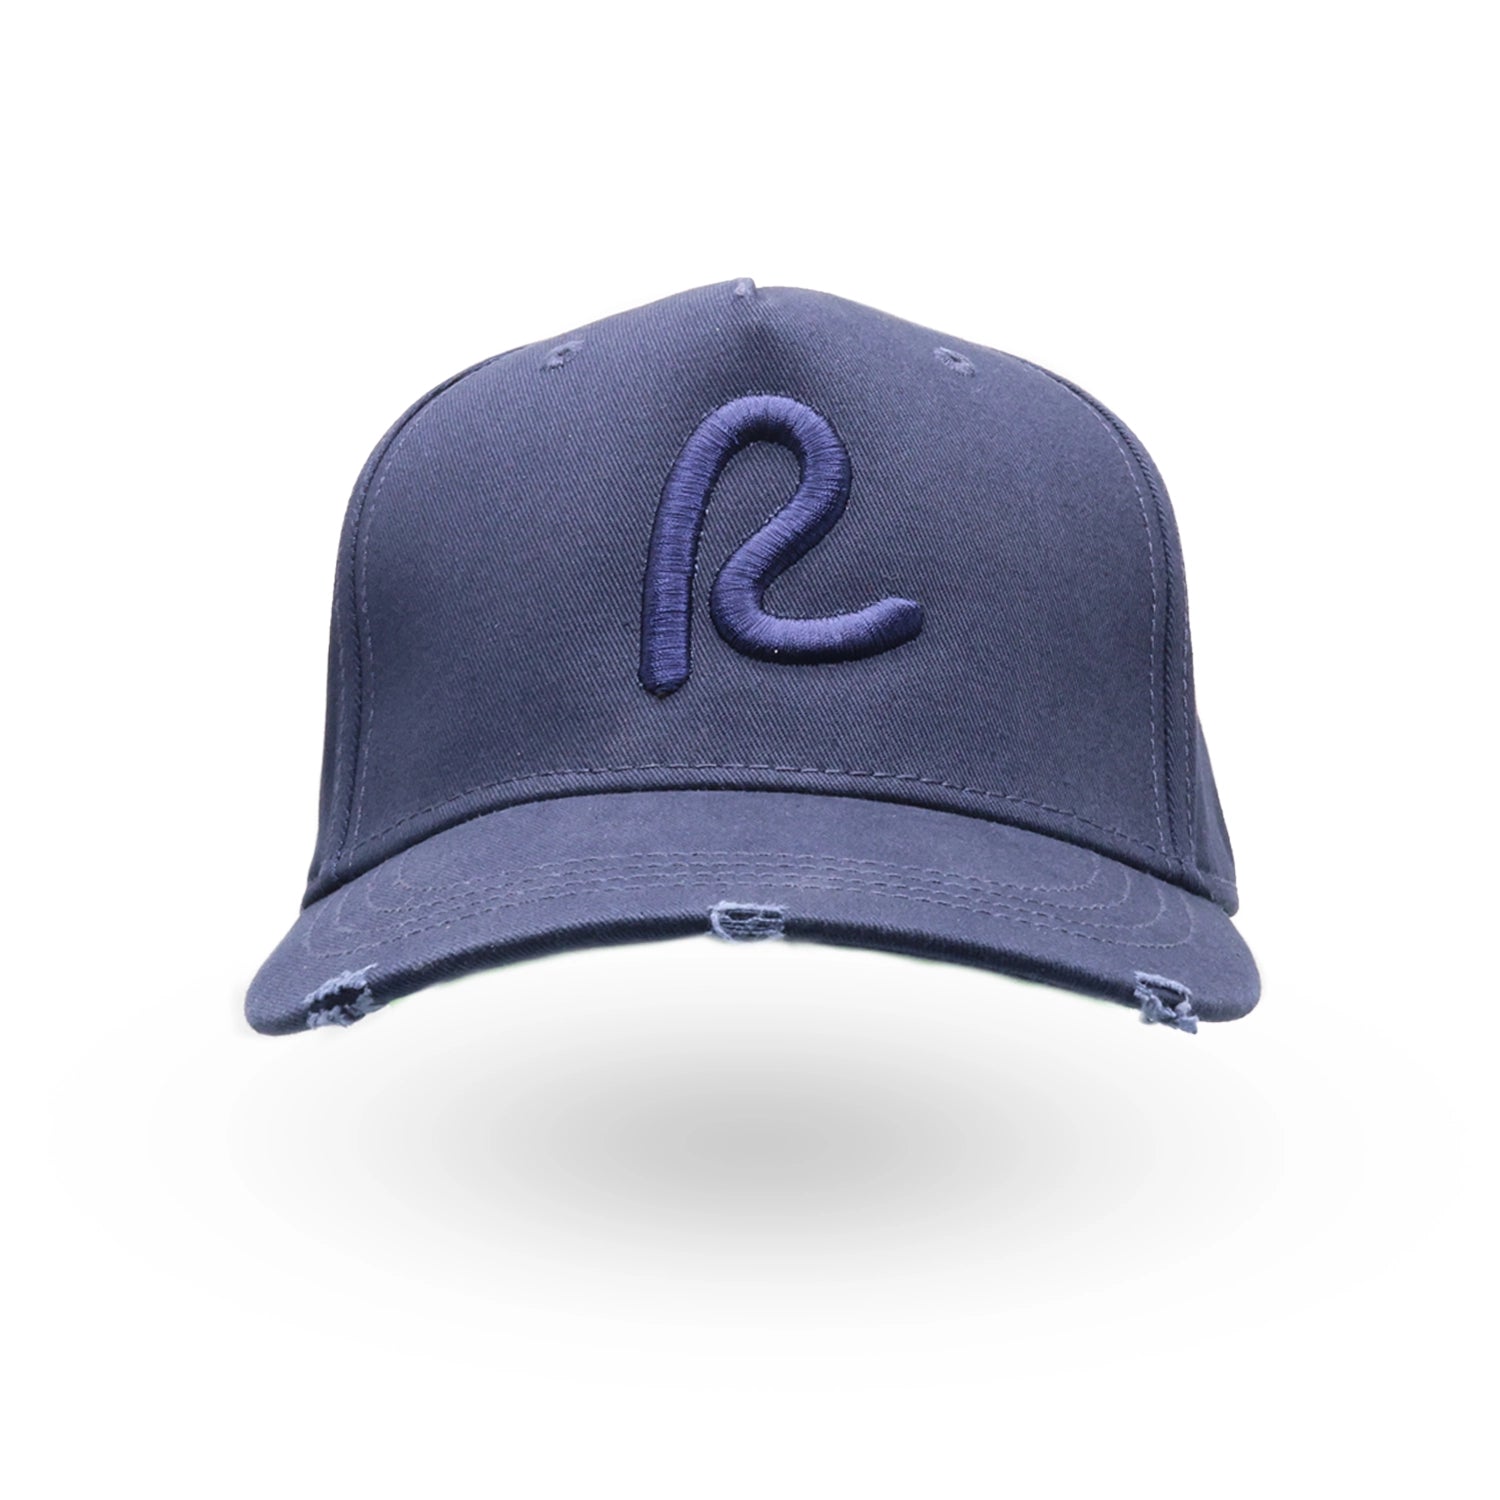 Rewired Distressed Classic Baseball Cap - Navy Tonal - Front